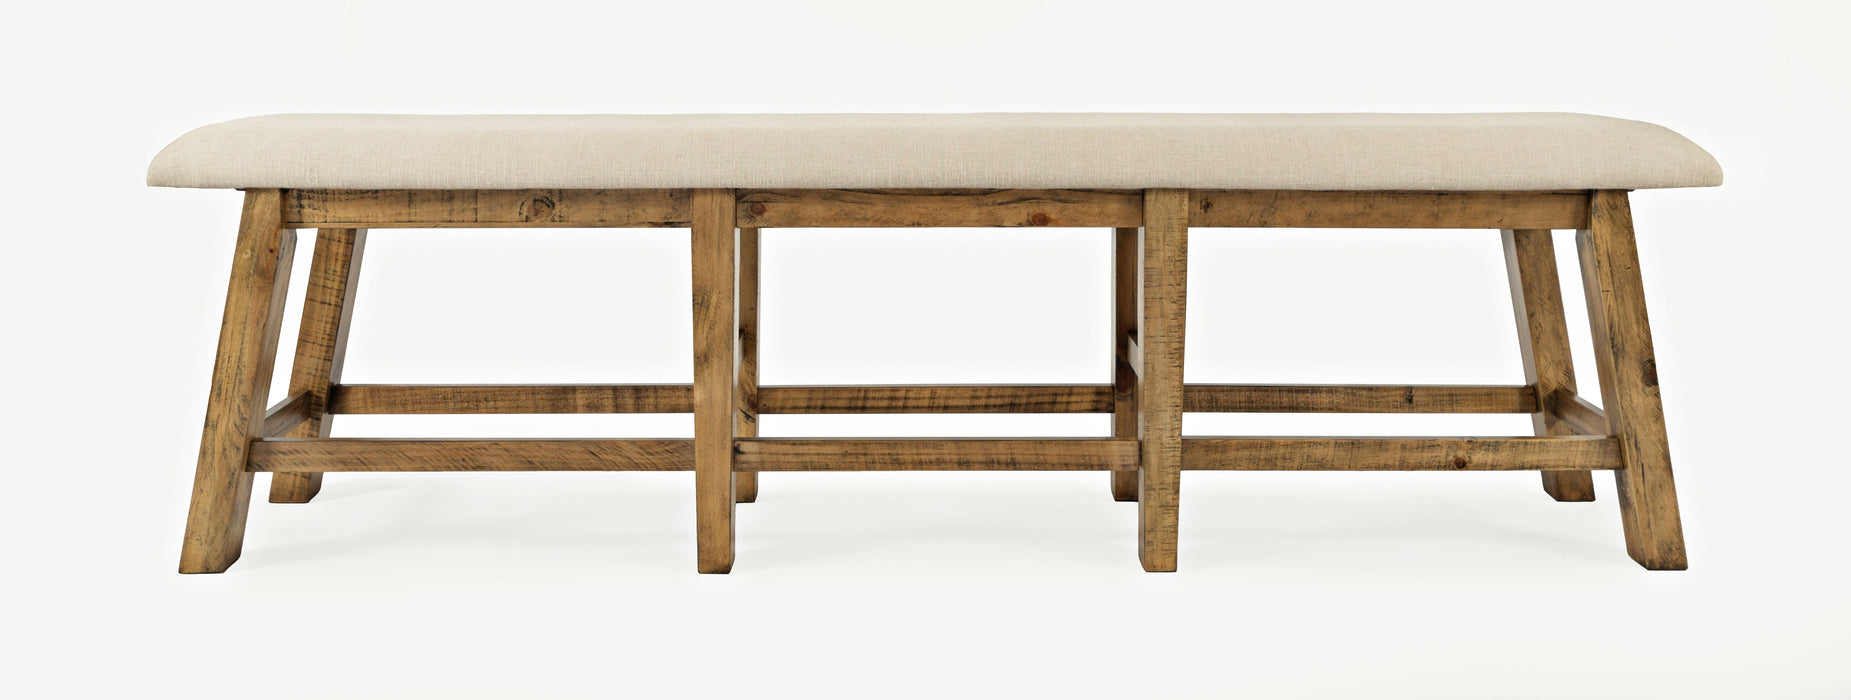 Jofran Telluride Counter Height Bench in Natural